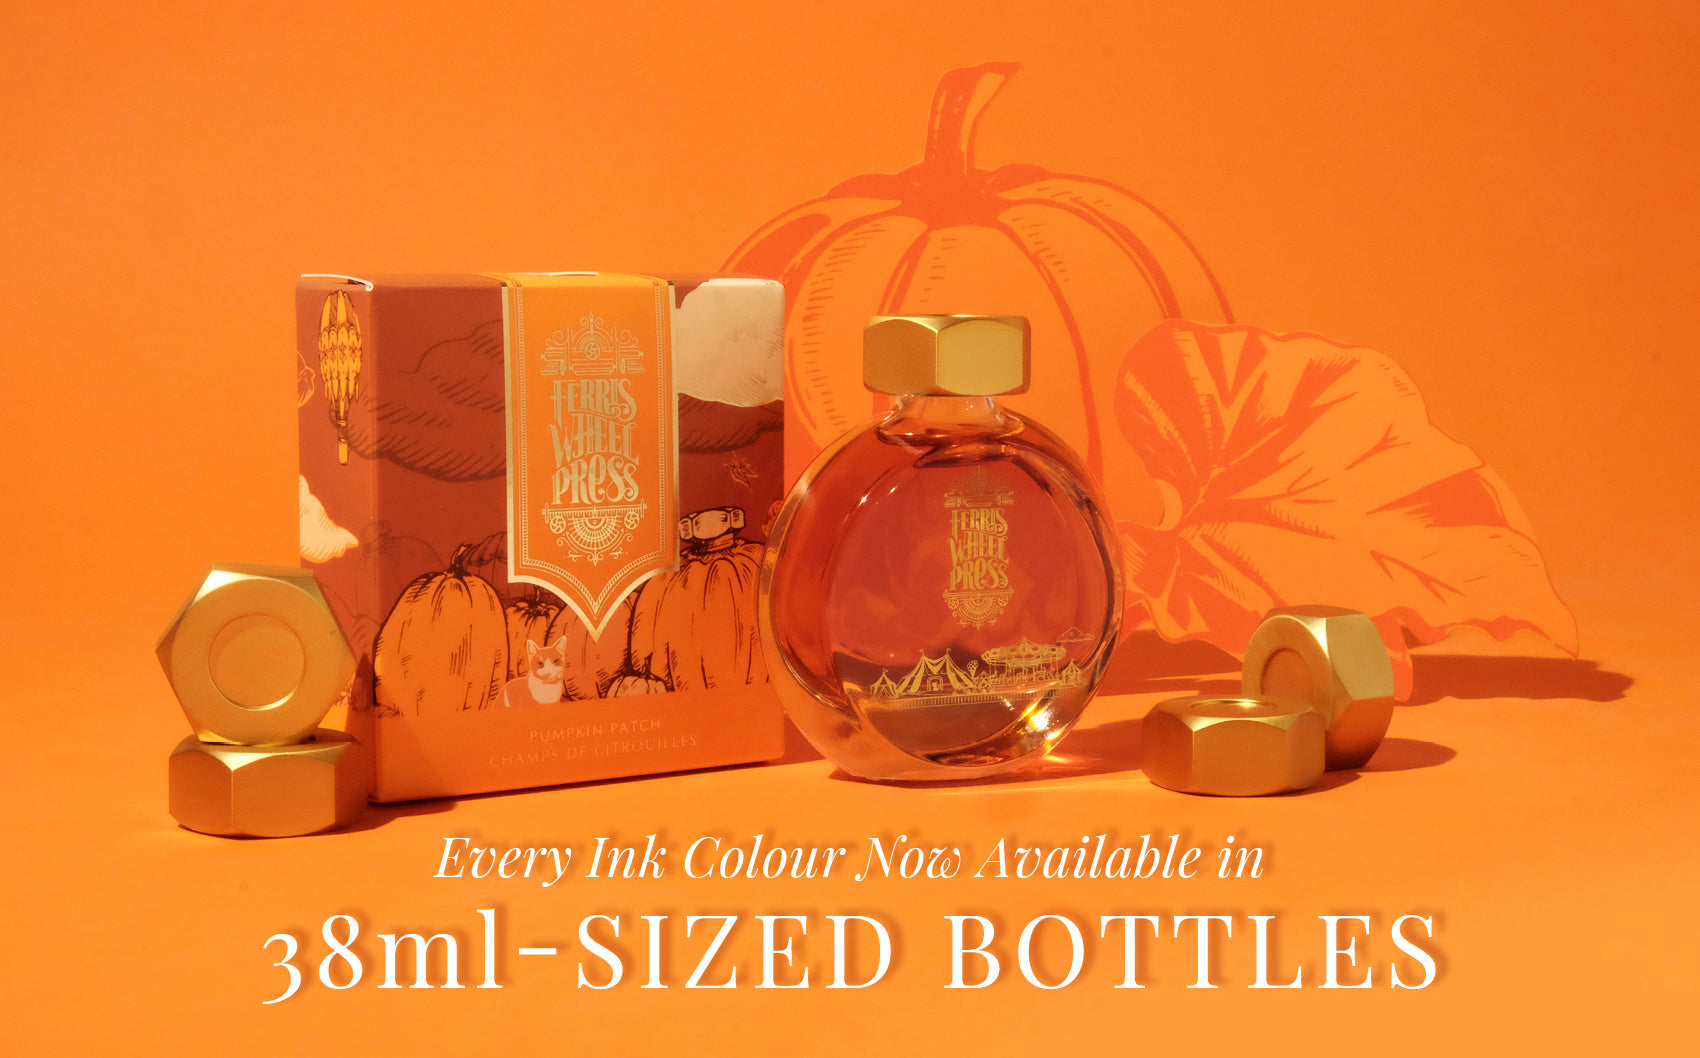 A 38mL of orange ink with the Ferris Wheel Press logo in gold surrounded by paper cut outs of hand-drawn pumpkins.